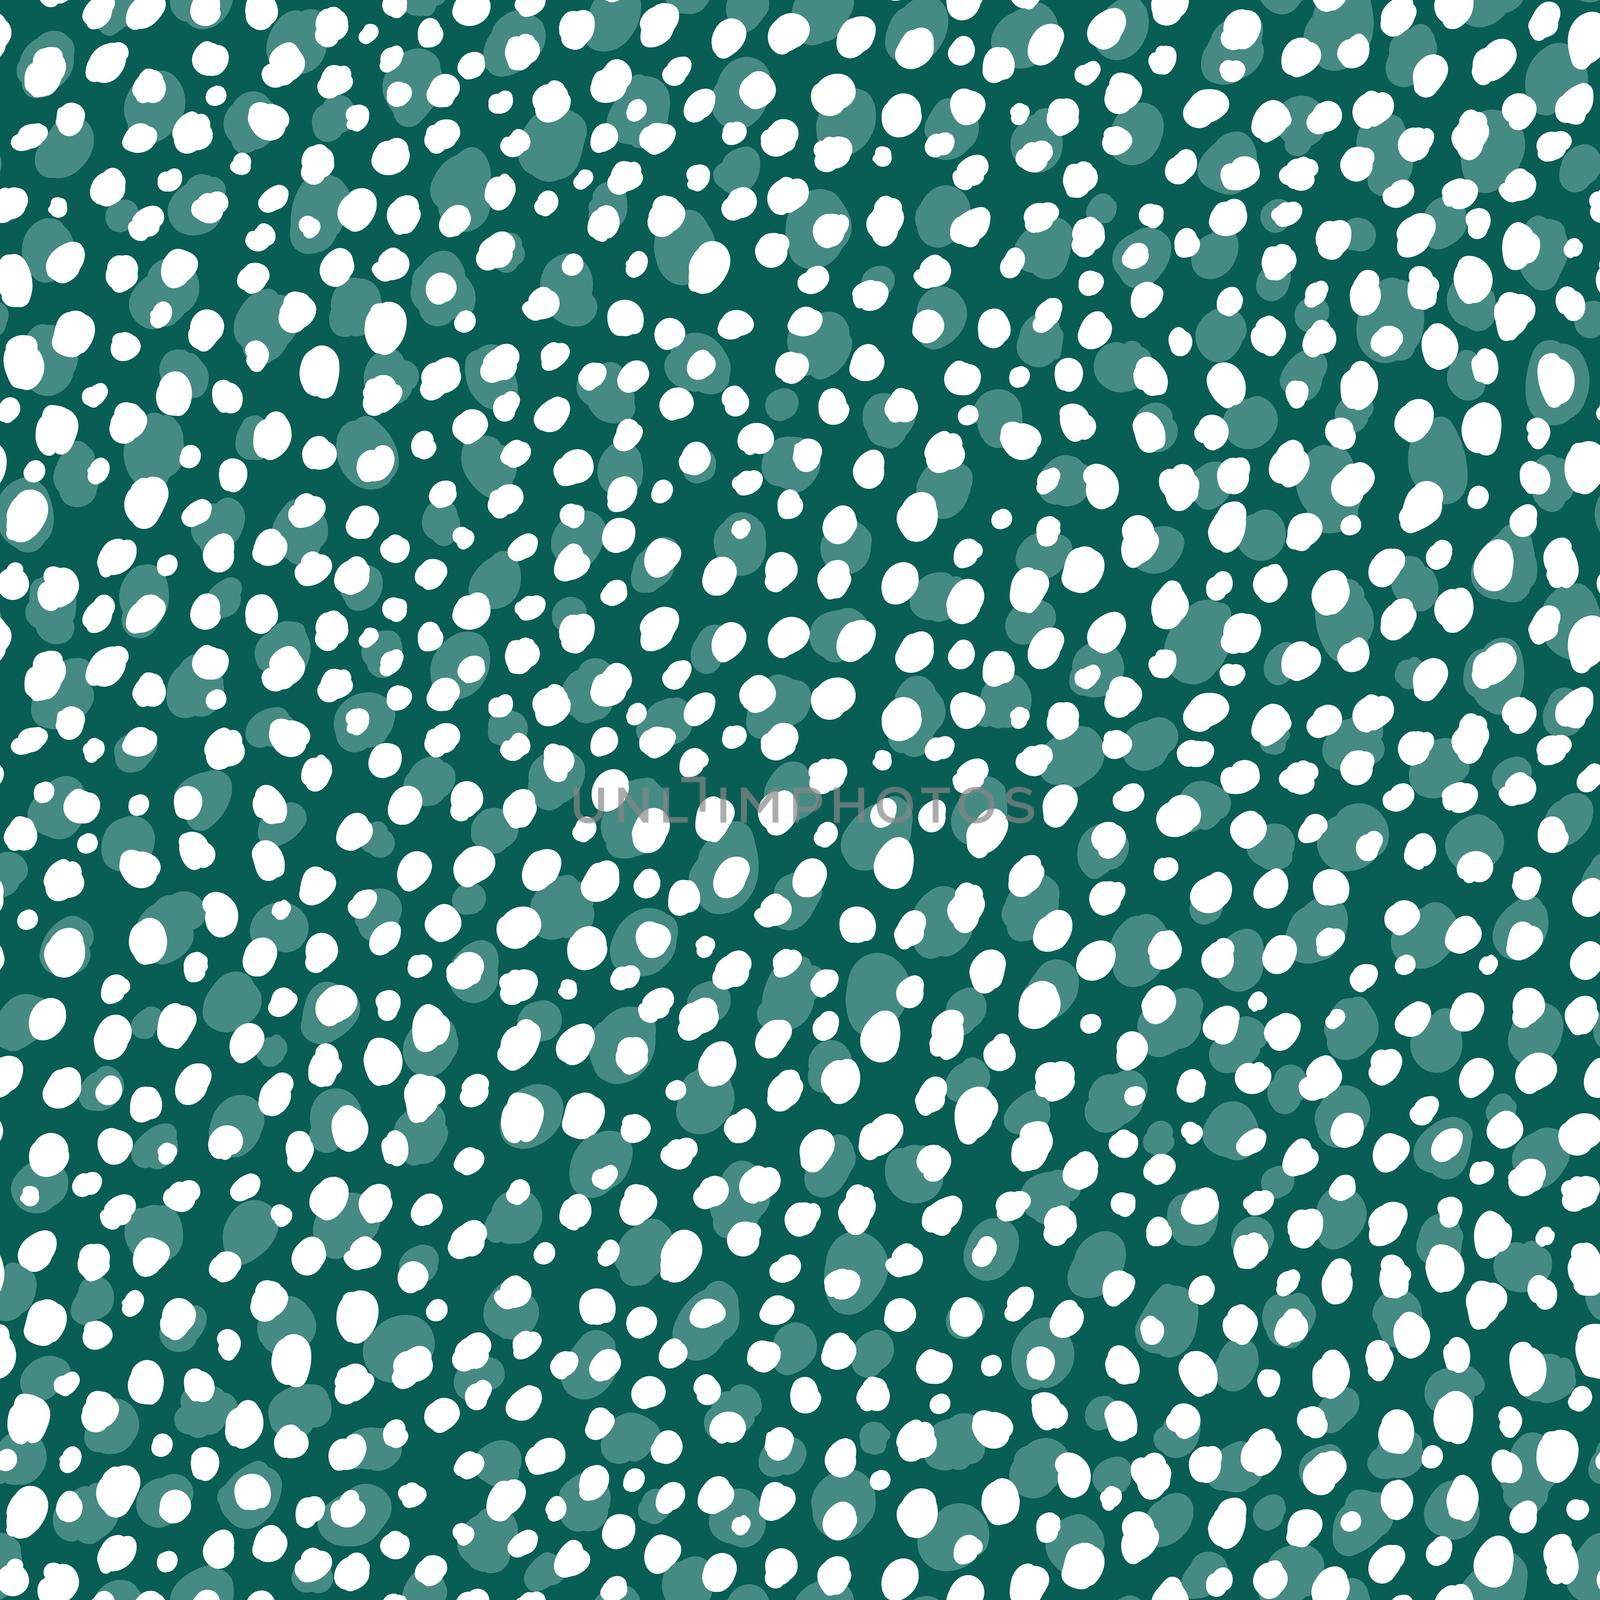 Abstract modern leopard seamless pattern. Animals trendy background. Green and white decorative vector stock illustration for print, card, postcard, fabric, textile. Modern ornament of stylized skin by allaku